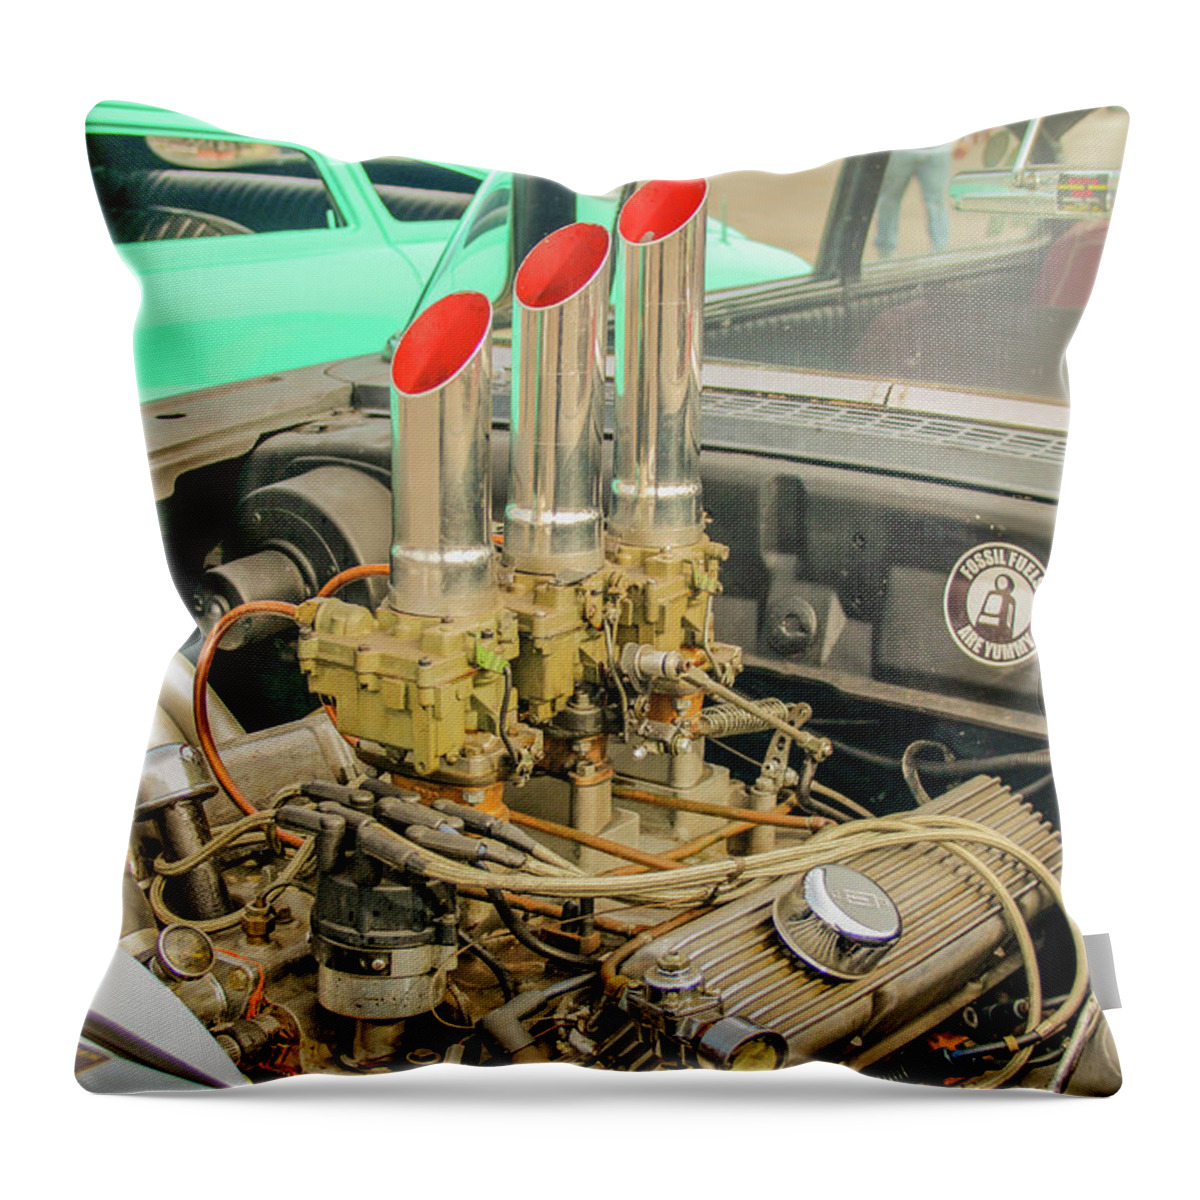 Ratrod Throw Pillow featuring the photograph Stacks by Darrell Foster